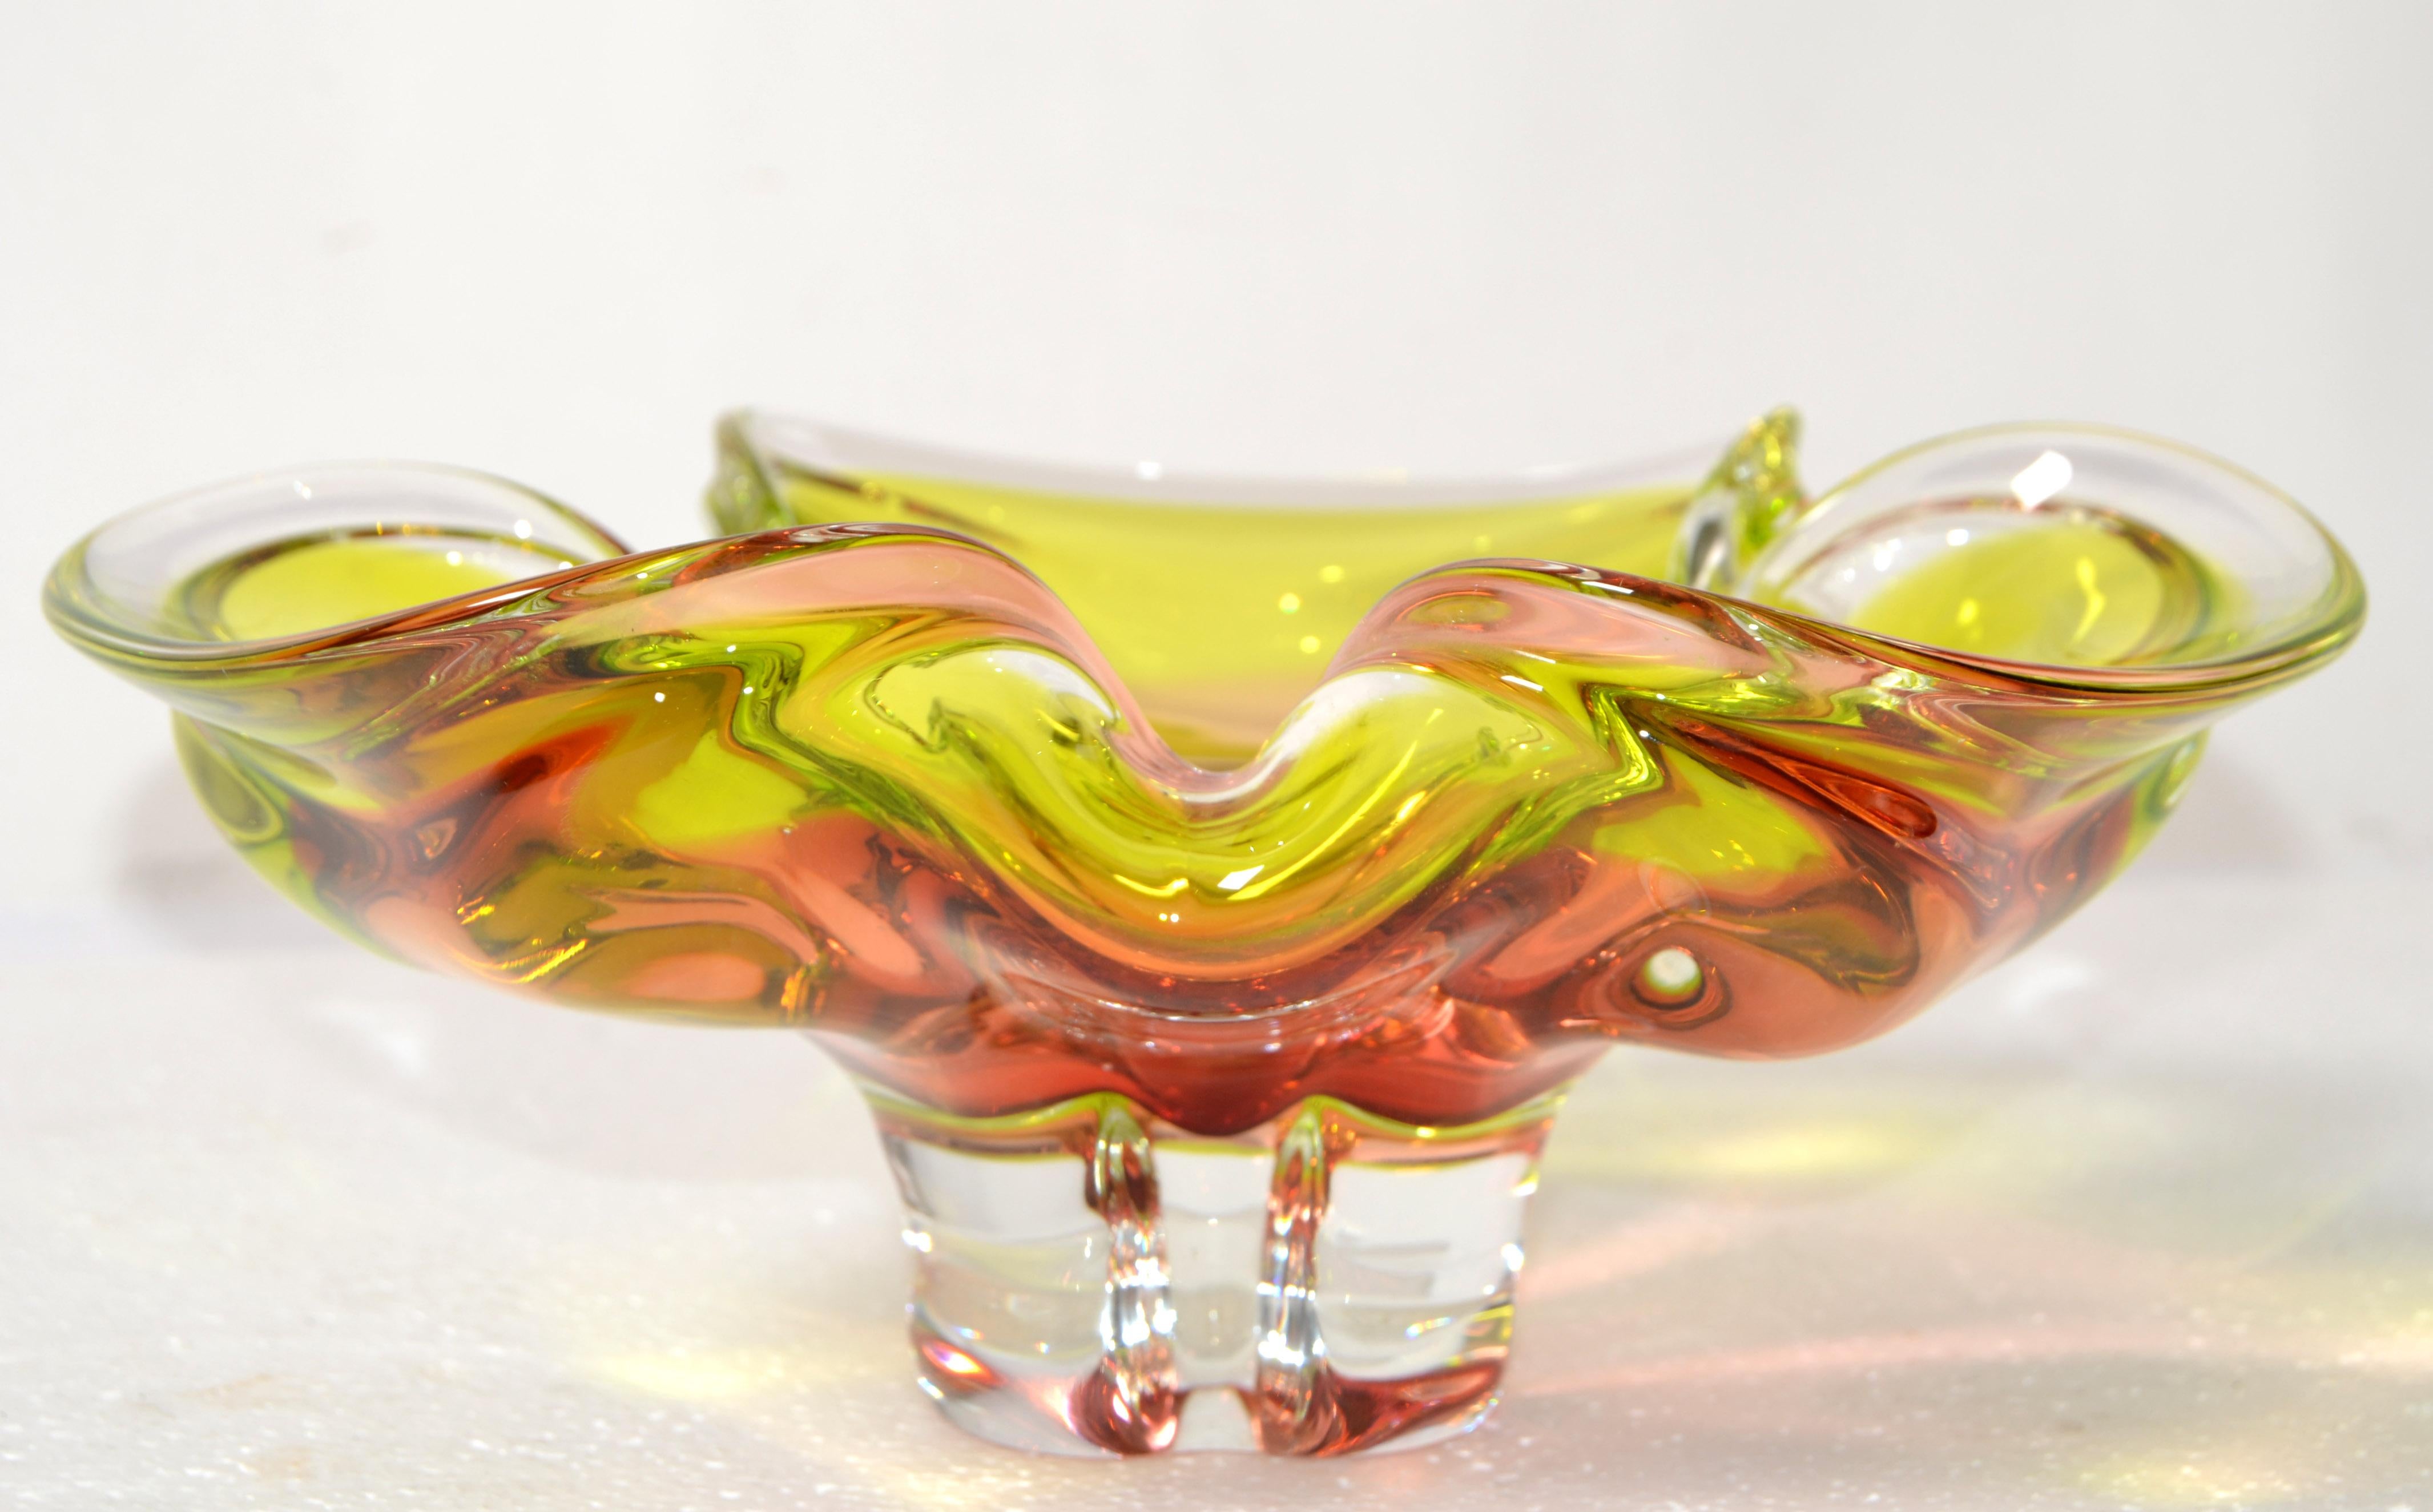 Sommerso Glass Murano Seguso Style Clover shape Bowl, Catchall or Vide Poche encased with 3 different colors, Rose, Light Green and transparent.
Mid-Century Modern Art Glass from Murano, Italy in the late 1970. No Markings.
Looks stunning in any